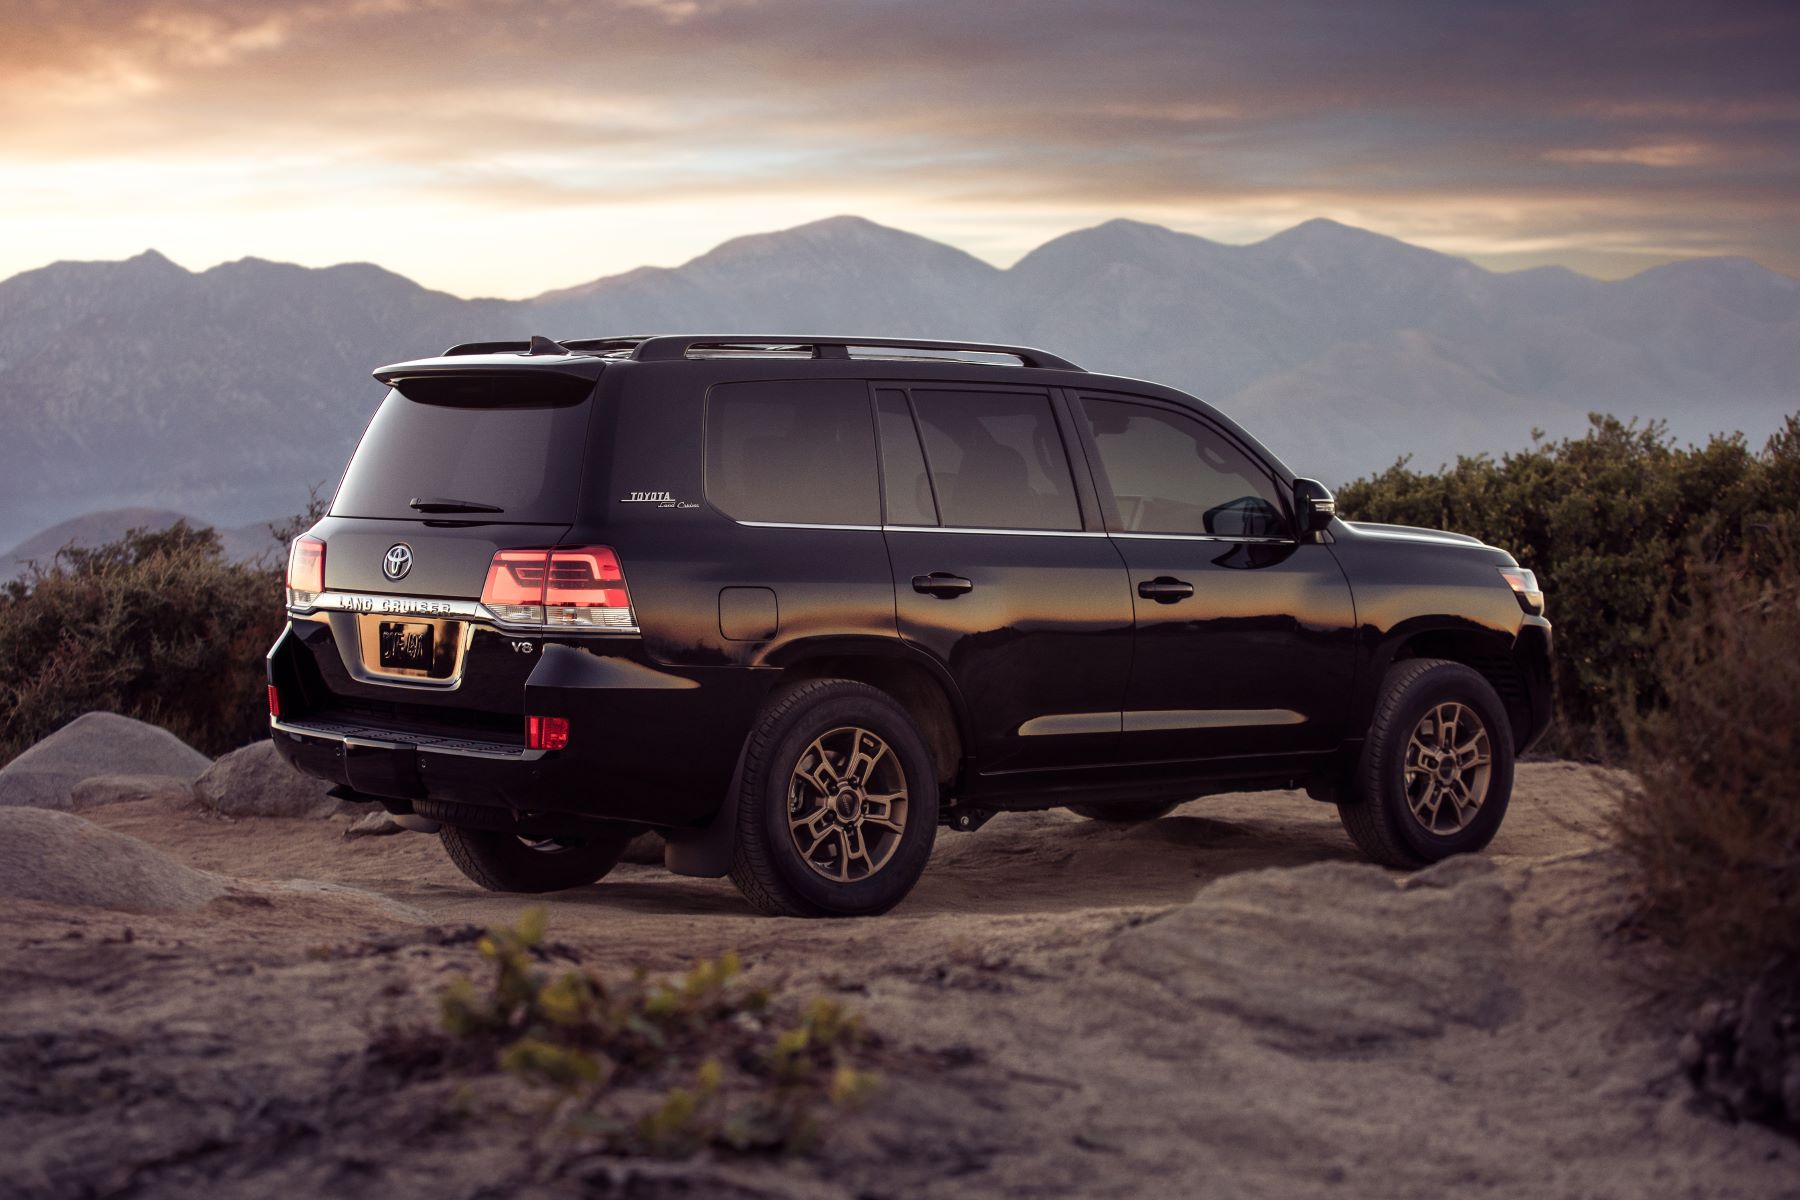 The 2021 Toyota Land Cruiser full-size SUV parked on a rocky mountain cliff in the wilderness at sunset is one of the best luxury SUV models out there.